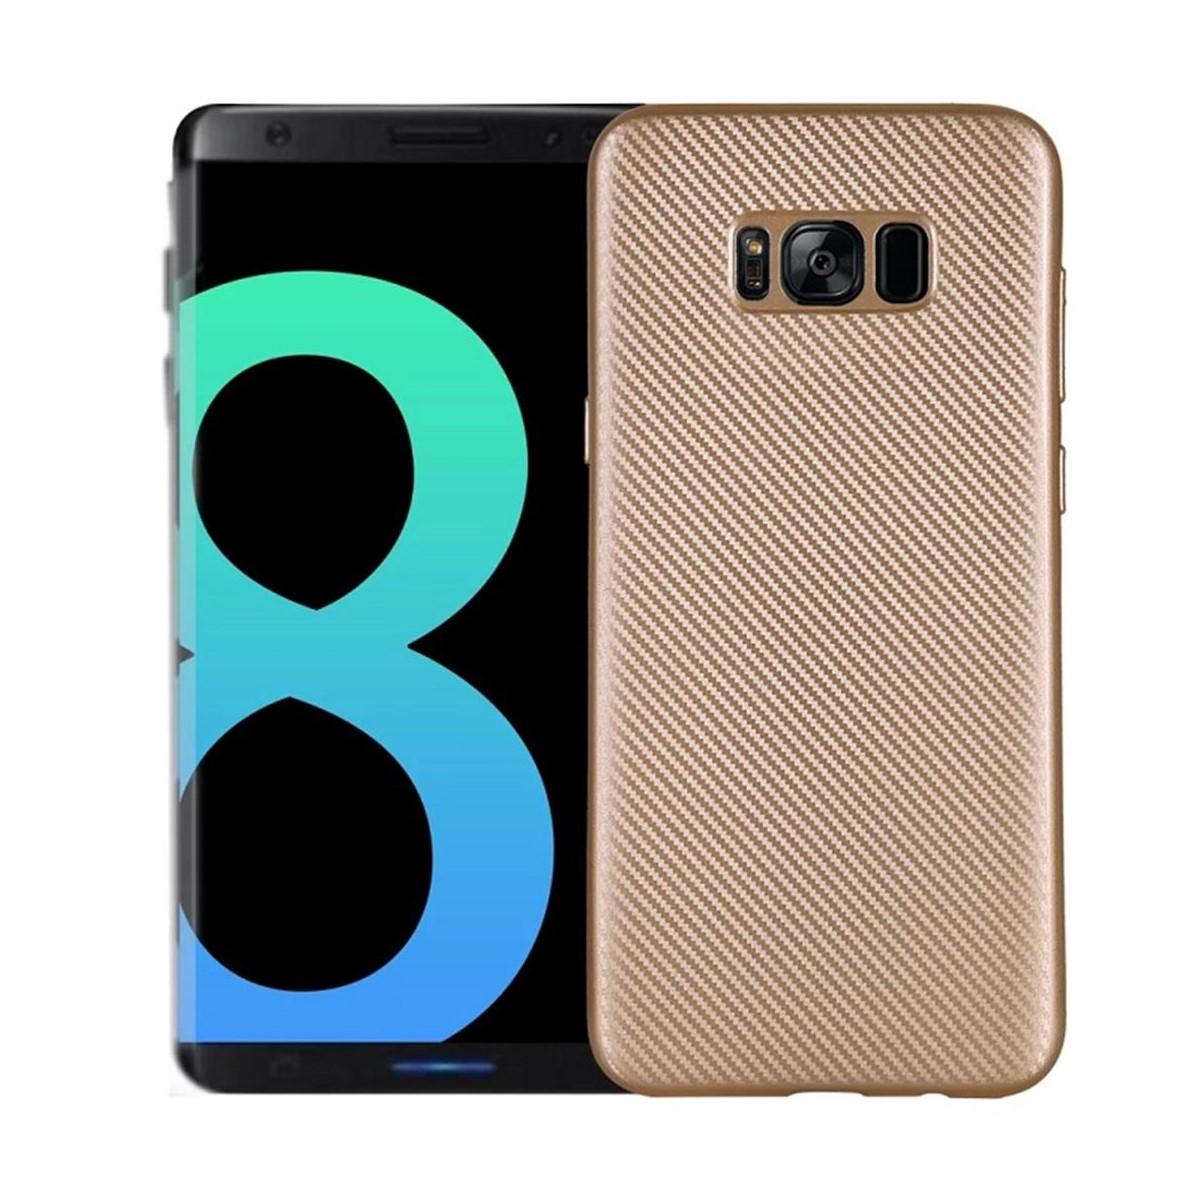 COVERKINGZ Handycase im Look, Backcover, Samsung, Gold S8 Plus, Carbon Galaxy